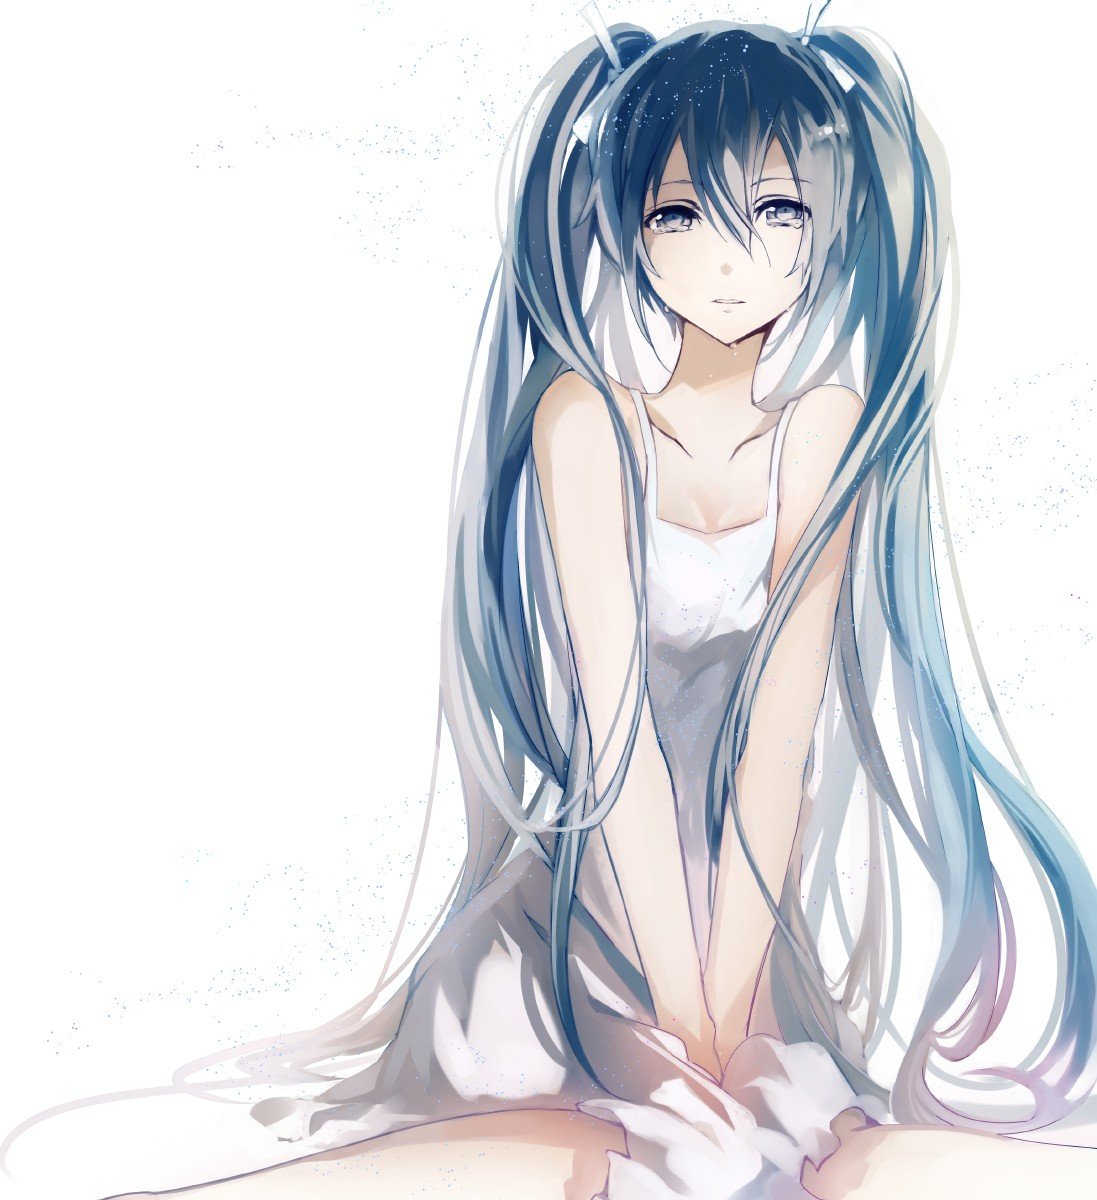 Vocaloid, Crying, Long hair, Twintails, Ribbon, Anime girls, Anime Wallpaper